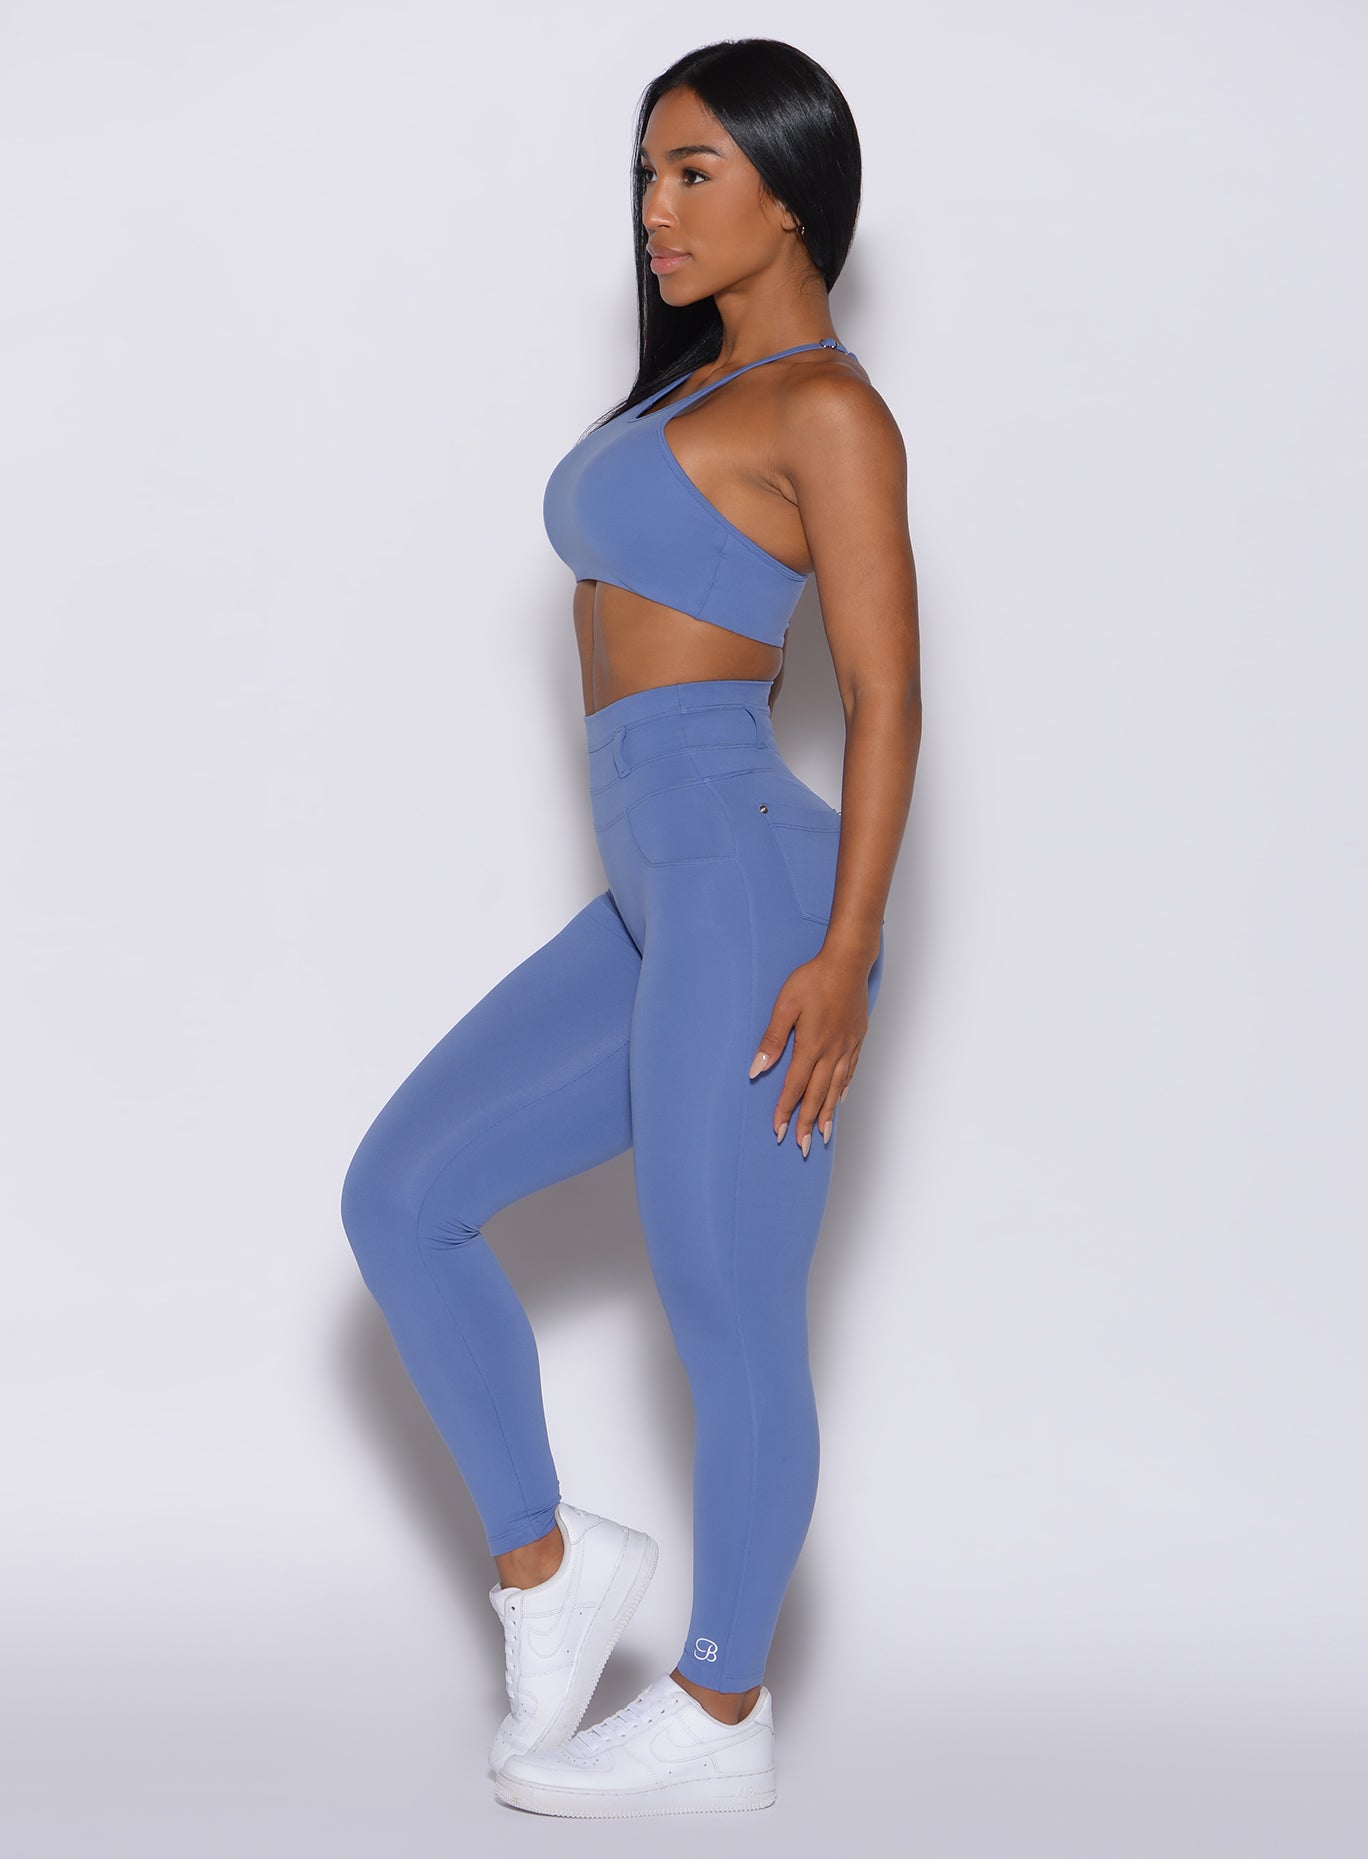 left side  profile view of a model wearing our peach bottoms leggings in denim blue color along with the matching sports bra